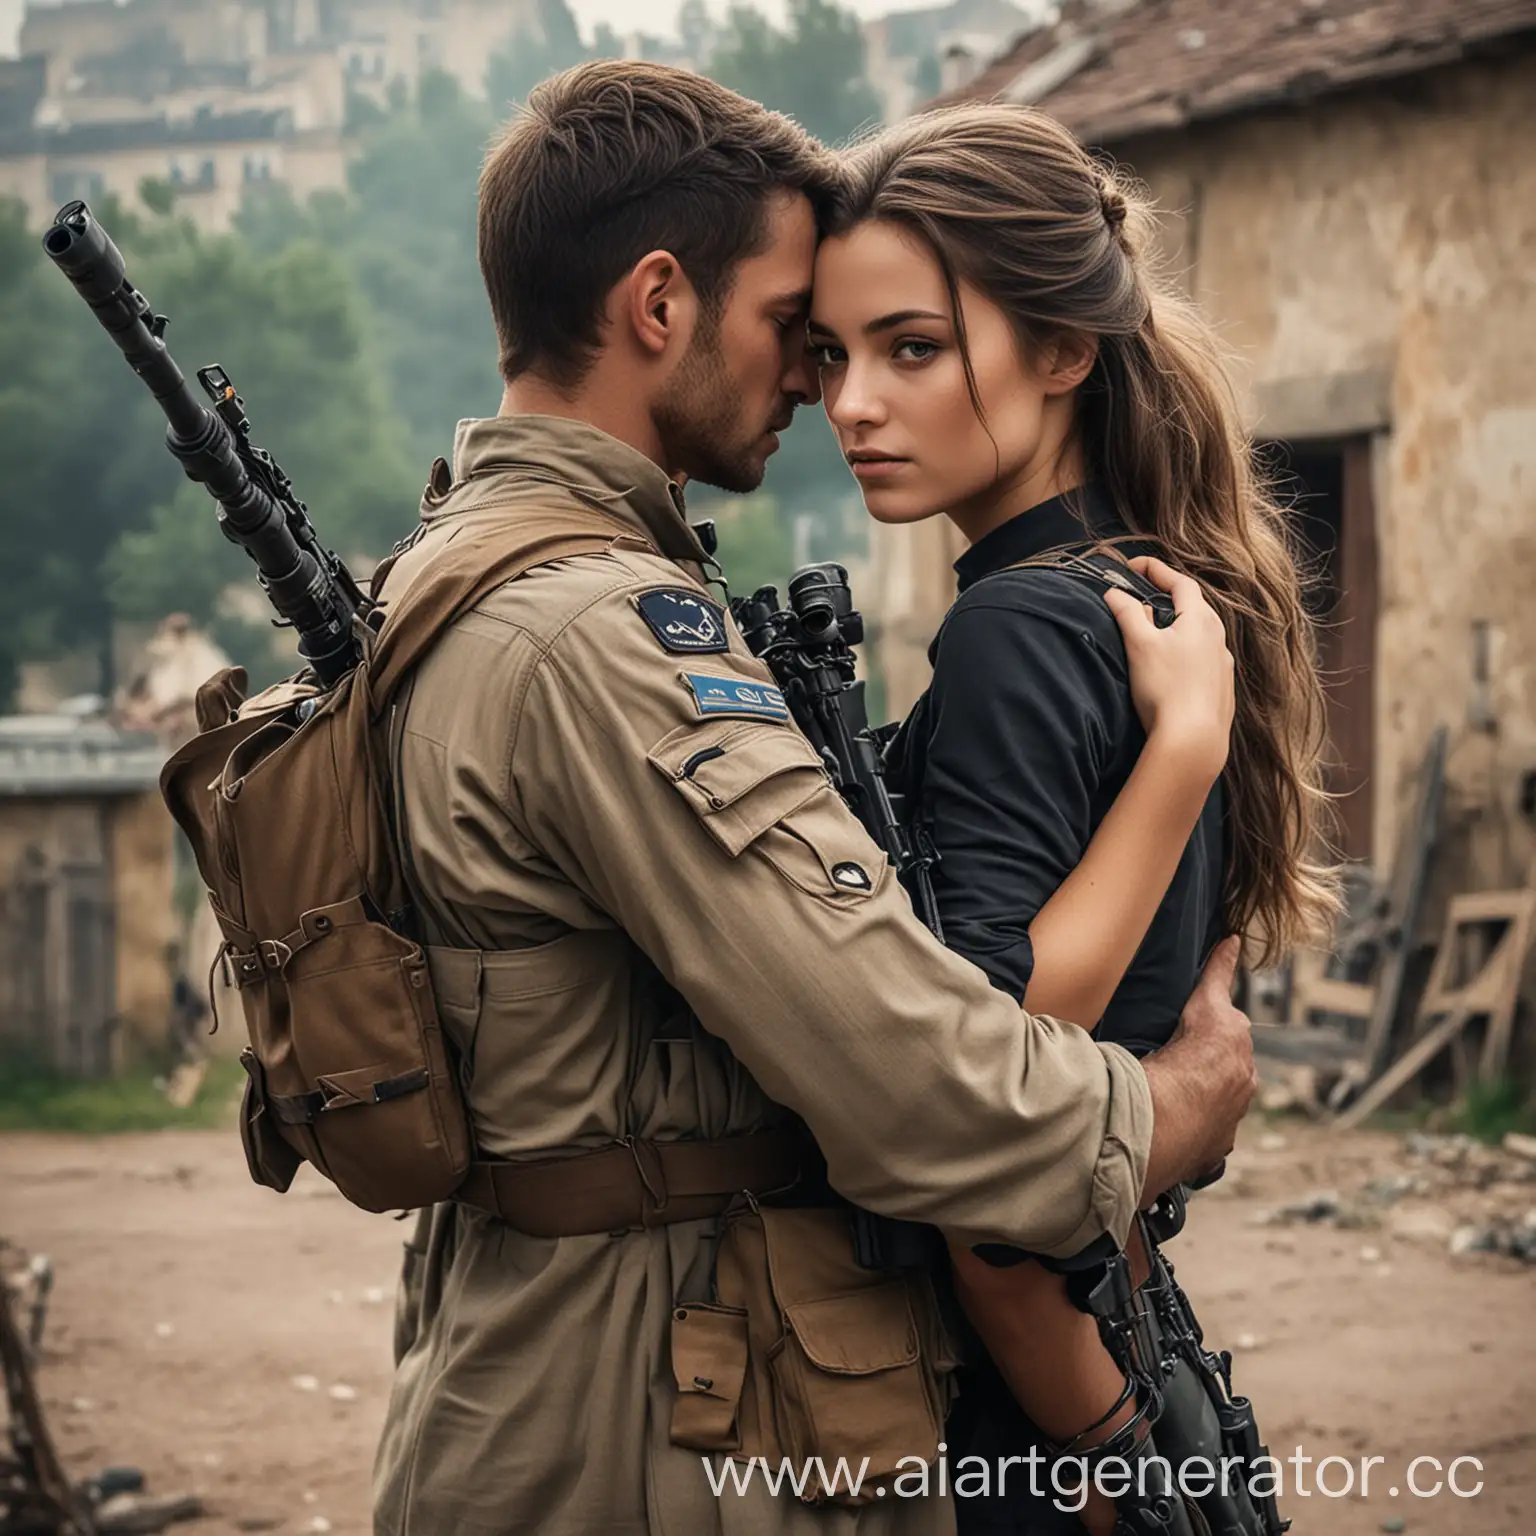 beautiful couple, where the girl is french, the sniper man is hugging the girl and there is a sniper on his back